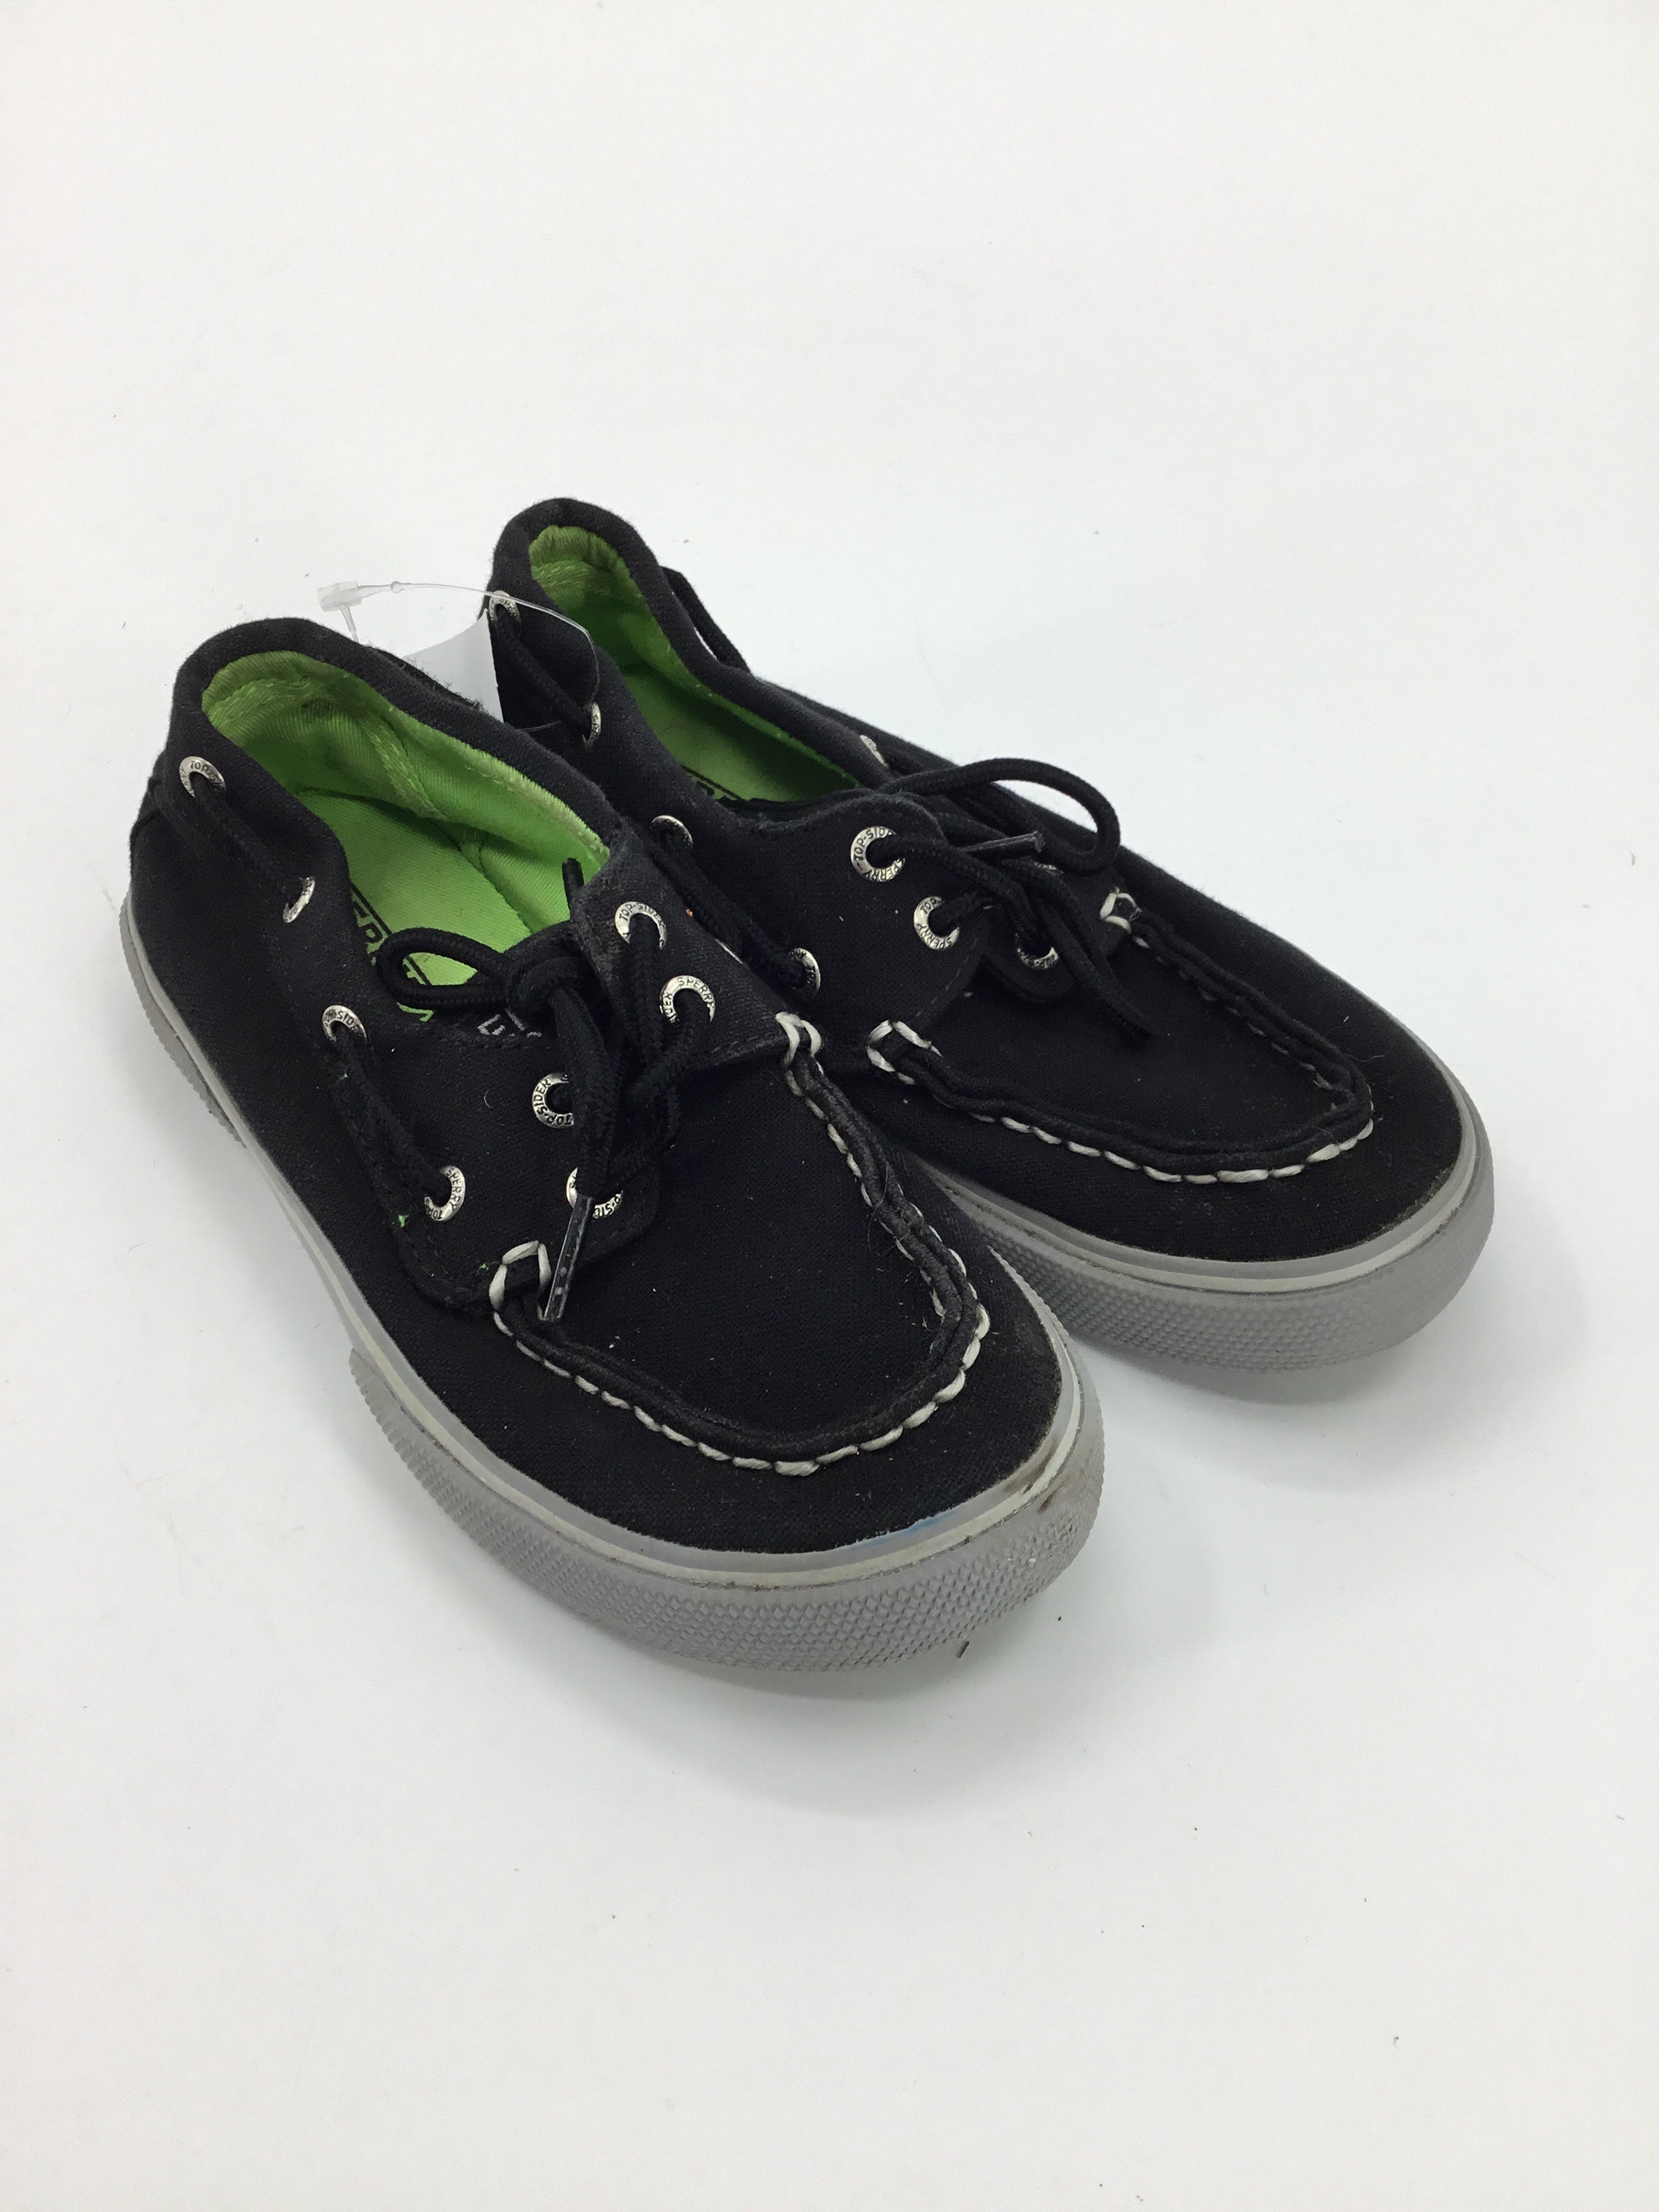 Sperry Child Size 1 Youth Black Sneakers